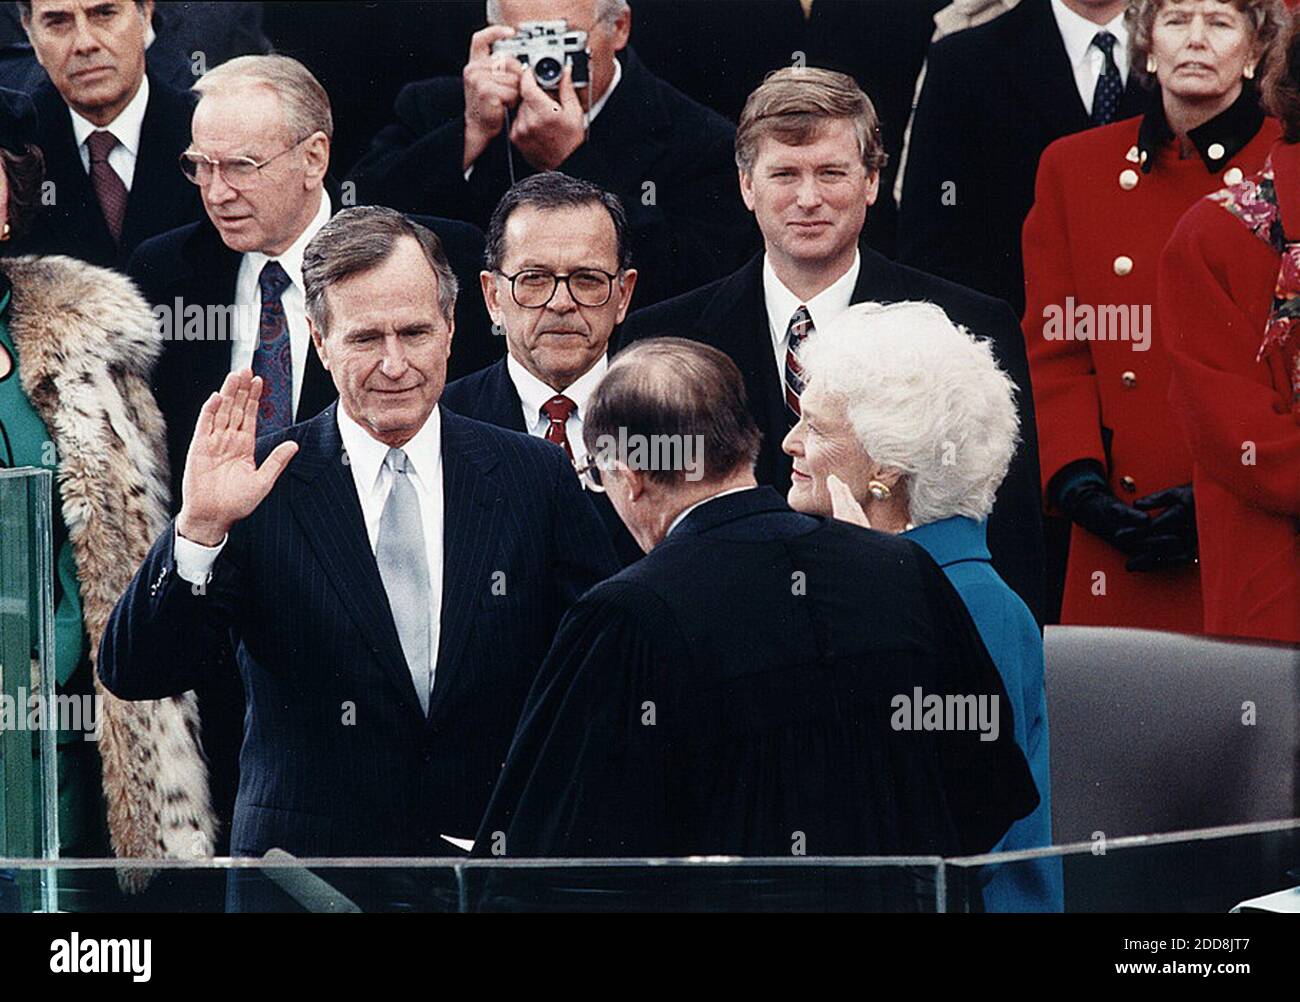 NO FILM, NO VIDEO, NO TV, NO DOCUMENTARY - Chief Justice William Rehnquist administers the oath of office to US President George H.W. Bush on the west front of the U.S. Capitol, as Vice President Dan Quayle and Barbara Bush looking on, in Washington, D.C., USA on January 20, 1989. Photo by Architect of the Capitol/Library of Congress/MCT/ABACAPRESS.COM Stock Photo